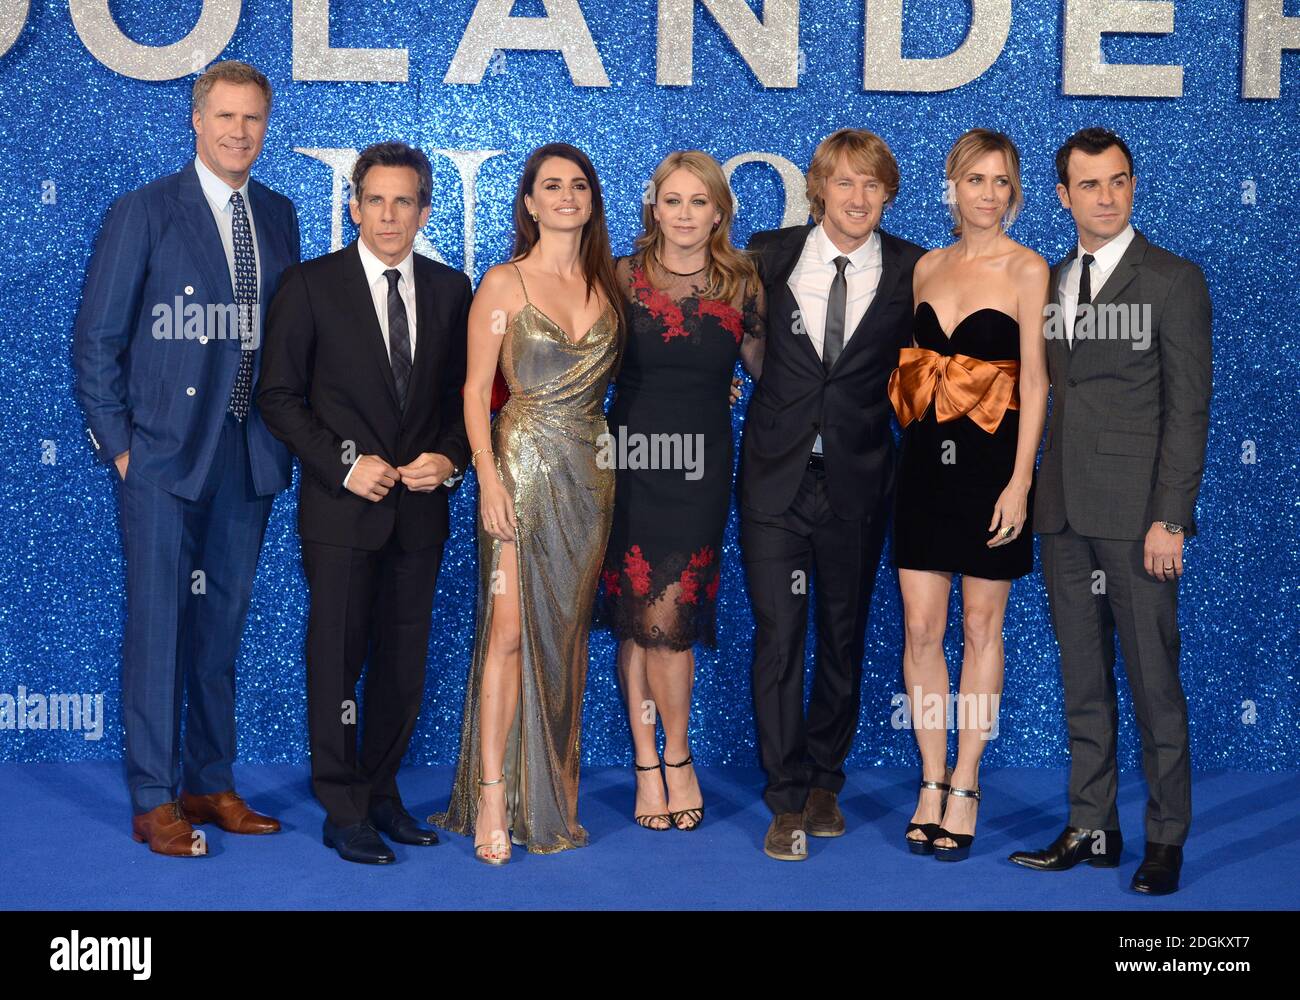 Will Ferrell, Ben Stiller, Penelope Cruz, Christine Taylor, Owen Wilson, Kristen Wiig and Justin Theroux attending the Zoolander 2 UK premiere, held at the Empire cinema, Leicester Square, London. Doug Peters/ EMPICS Entertainment. Picture date: Thursday February 4, 2016. Stock Photo